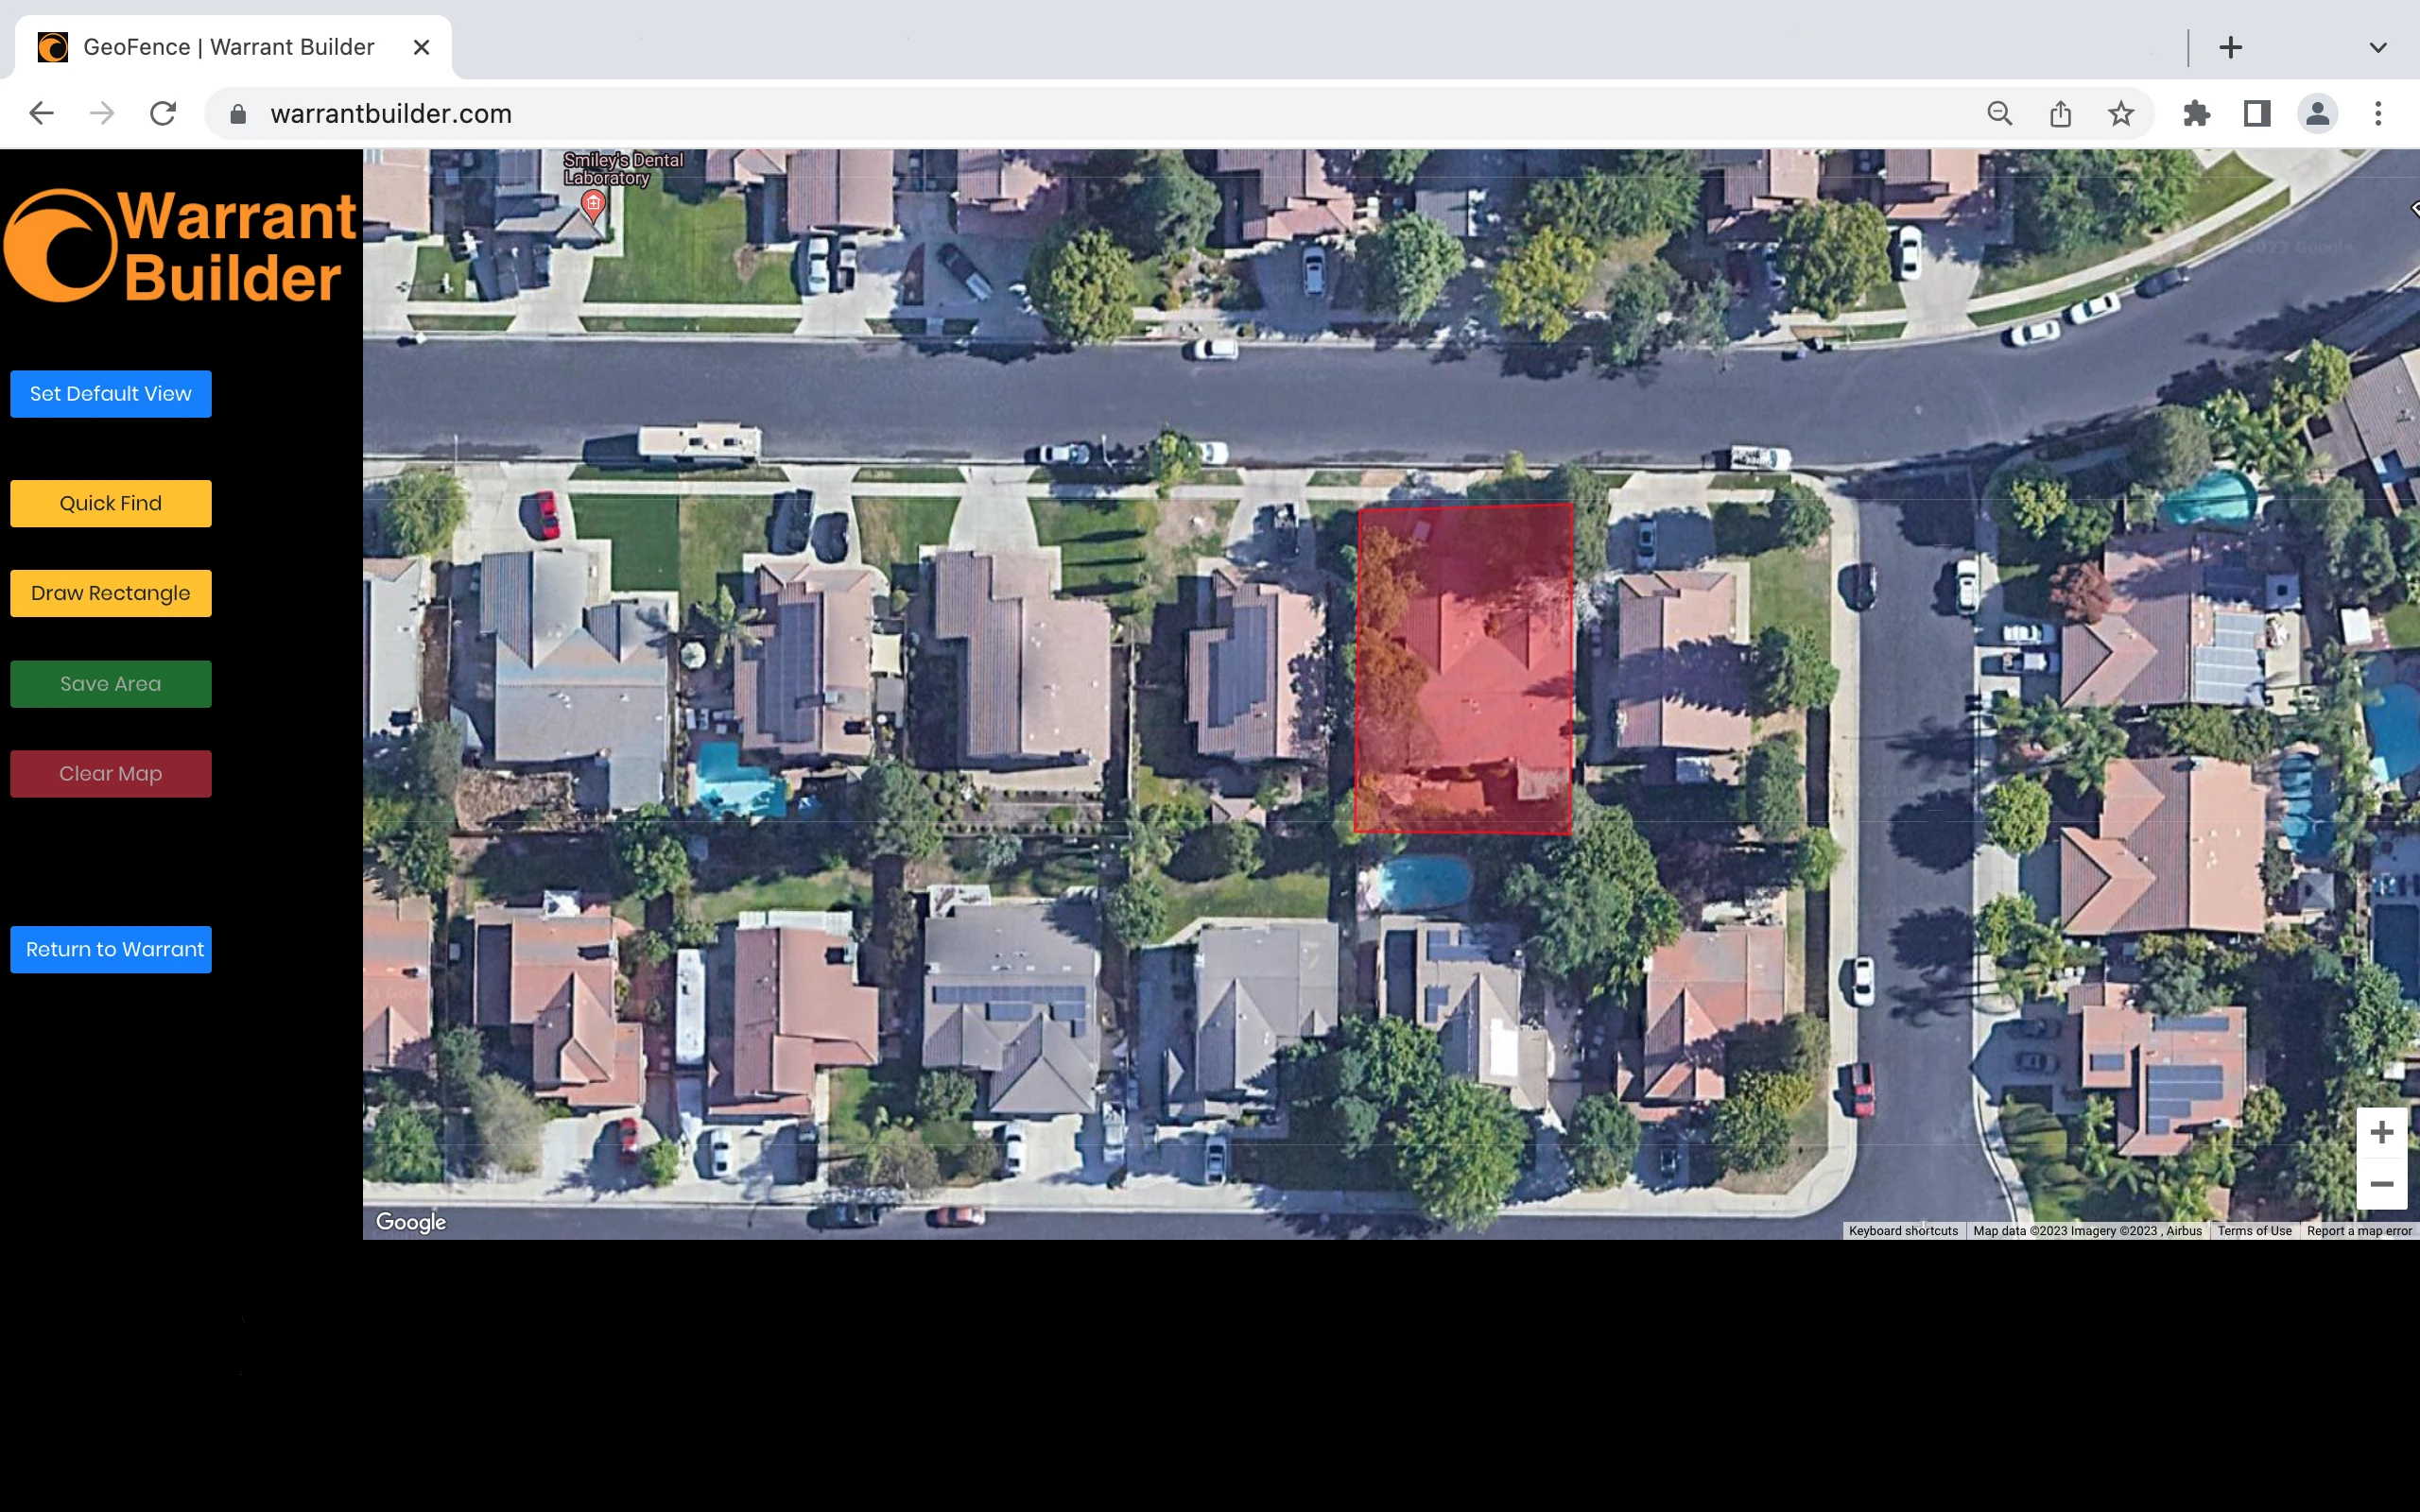 Warrant Builder geofence warrant tool showing Phase 1, reverse location anonymized ID, mobile phones